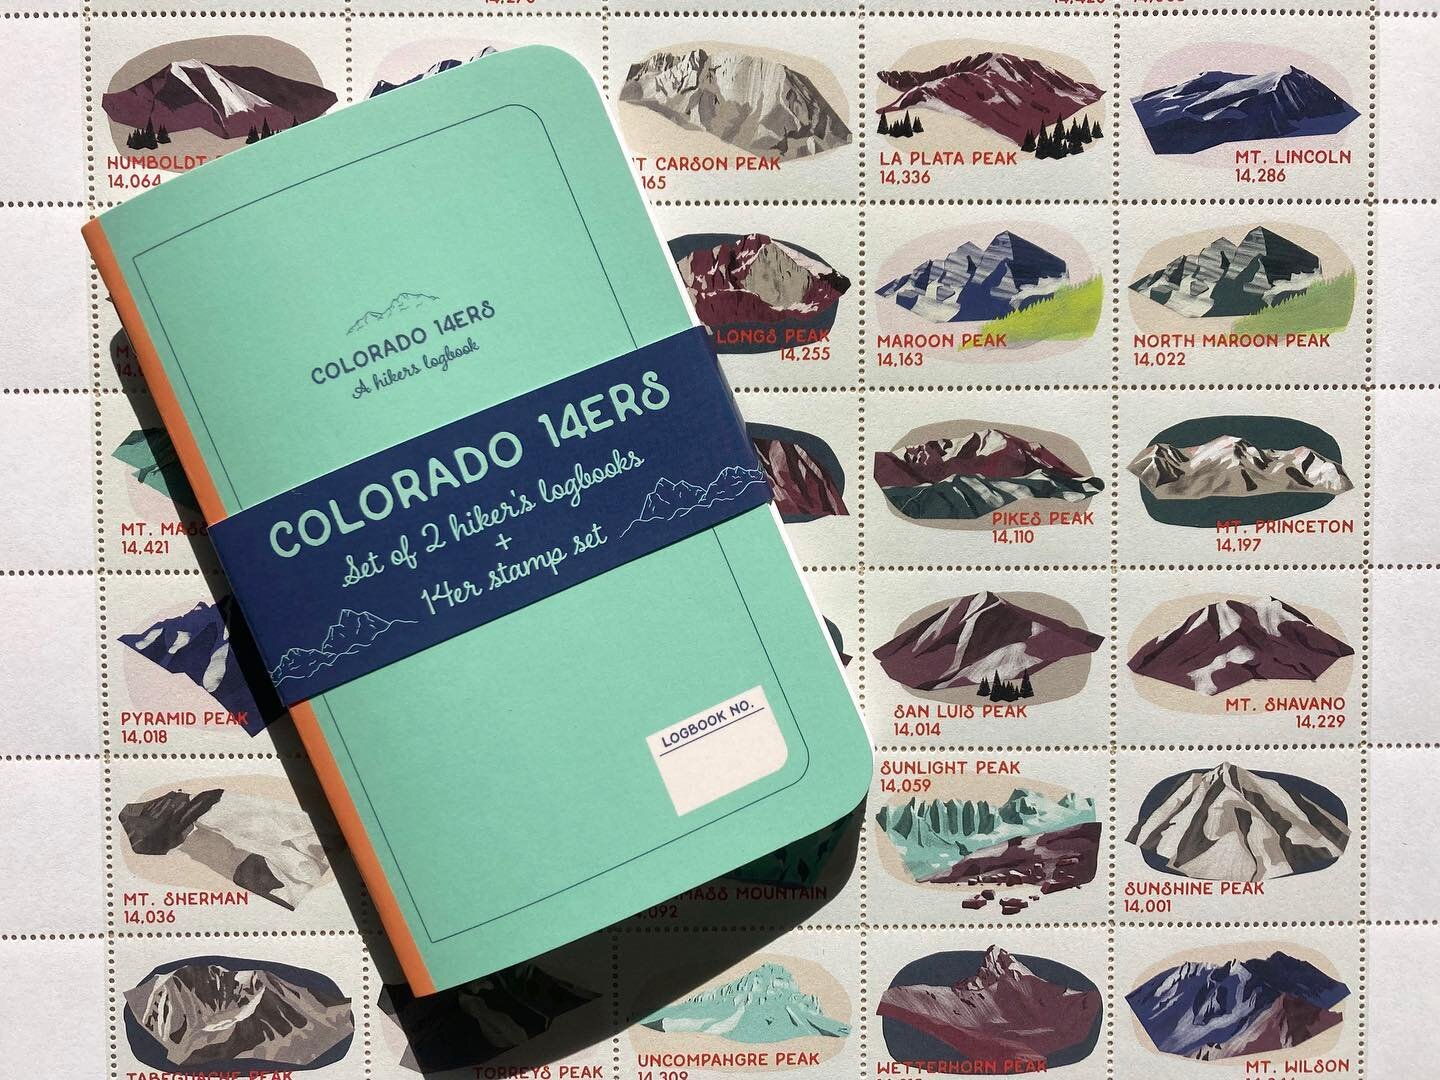 Here it is friends! I&rsquo;ve been cookin&rsquo; this idea for a while now, and finally have all my ducks in a row. I present to you, the Colorado 14ers hiker&rsquo;s logbook + stamp sheet. Designed to fit in your pocket or pack, this journal set al